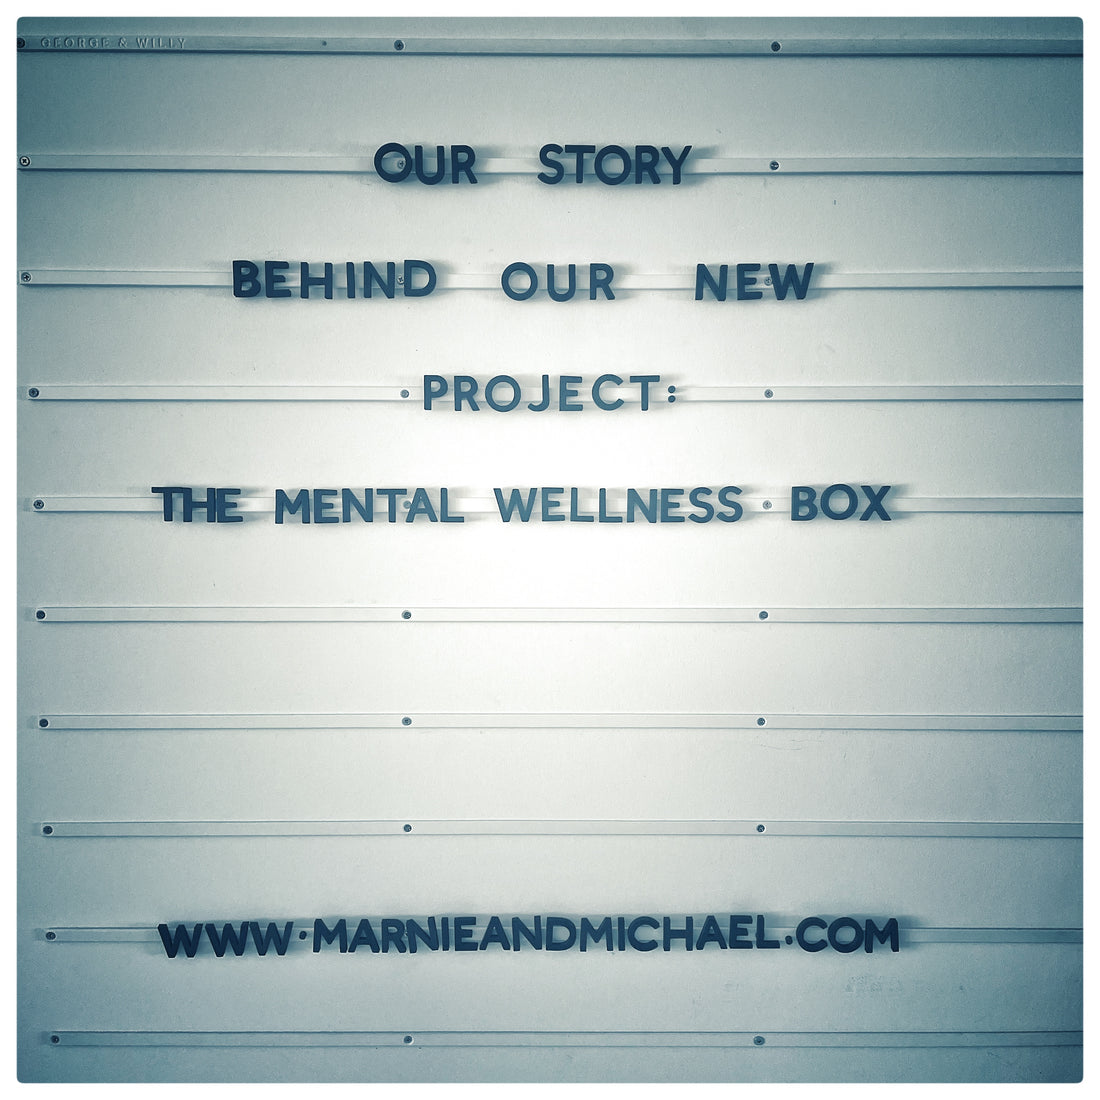 Our Story behind our new project: THE MENTAL WELLNESS BOX